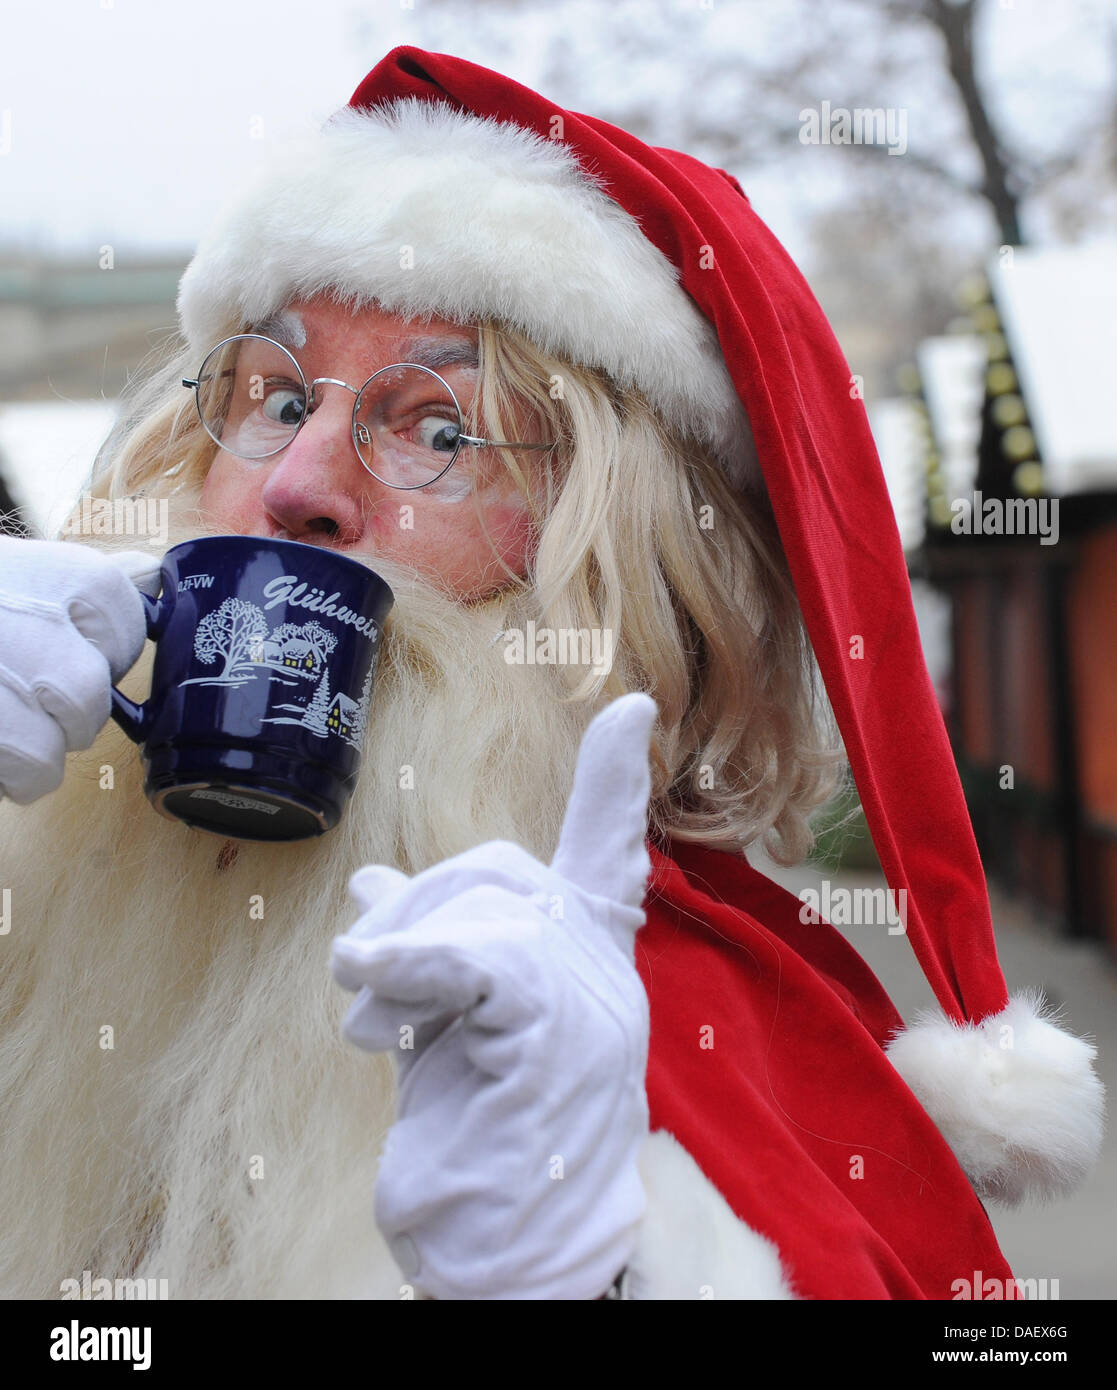 A man dressed up as Santa Clause drinks a cup of mulled wine at the nostalgic Christmas market at the Opera palace in Berlin, Germany, 17 November 2011. From 23 November 2011 till 26 December 2011 the Christmas market, which celebrates its 20th anniversary, will be home to 160 booths and rides. Photo: JENS KALAENE Stock Photo